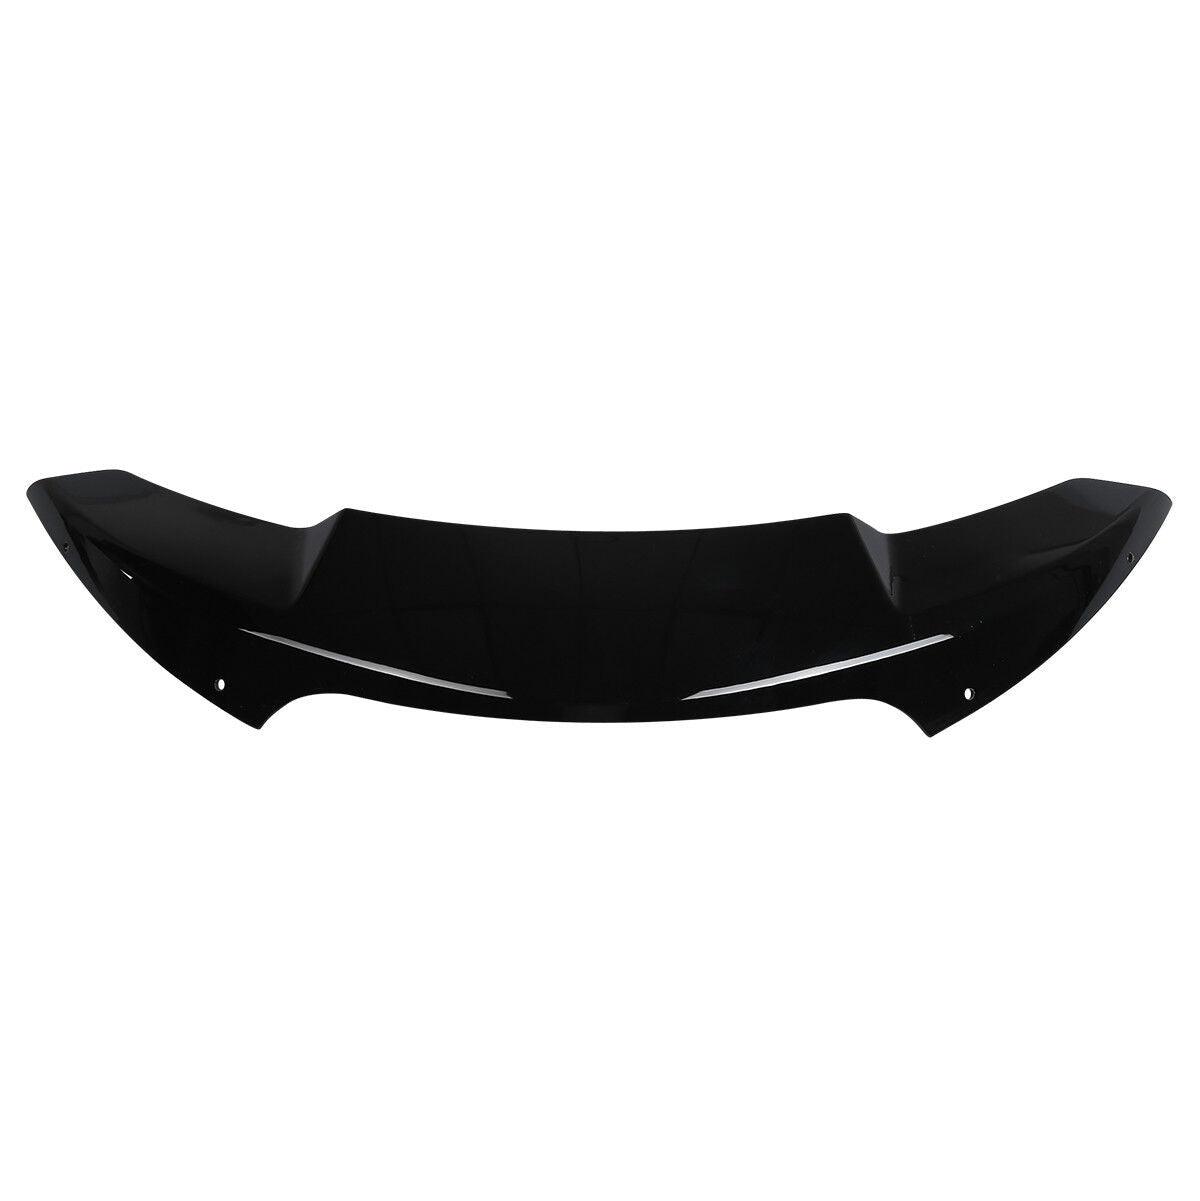 4.5" Black Windshield Windscreen Fit For Harley Road Glide FLTRX 2015-2021 2018 - Moto Life Products